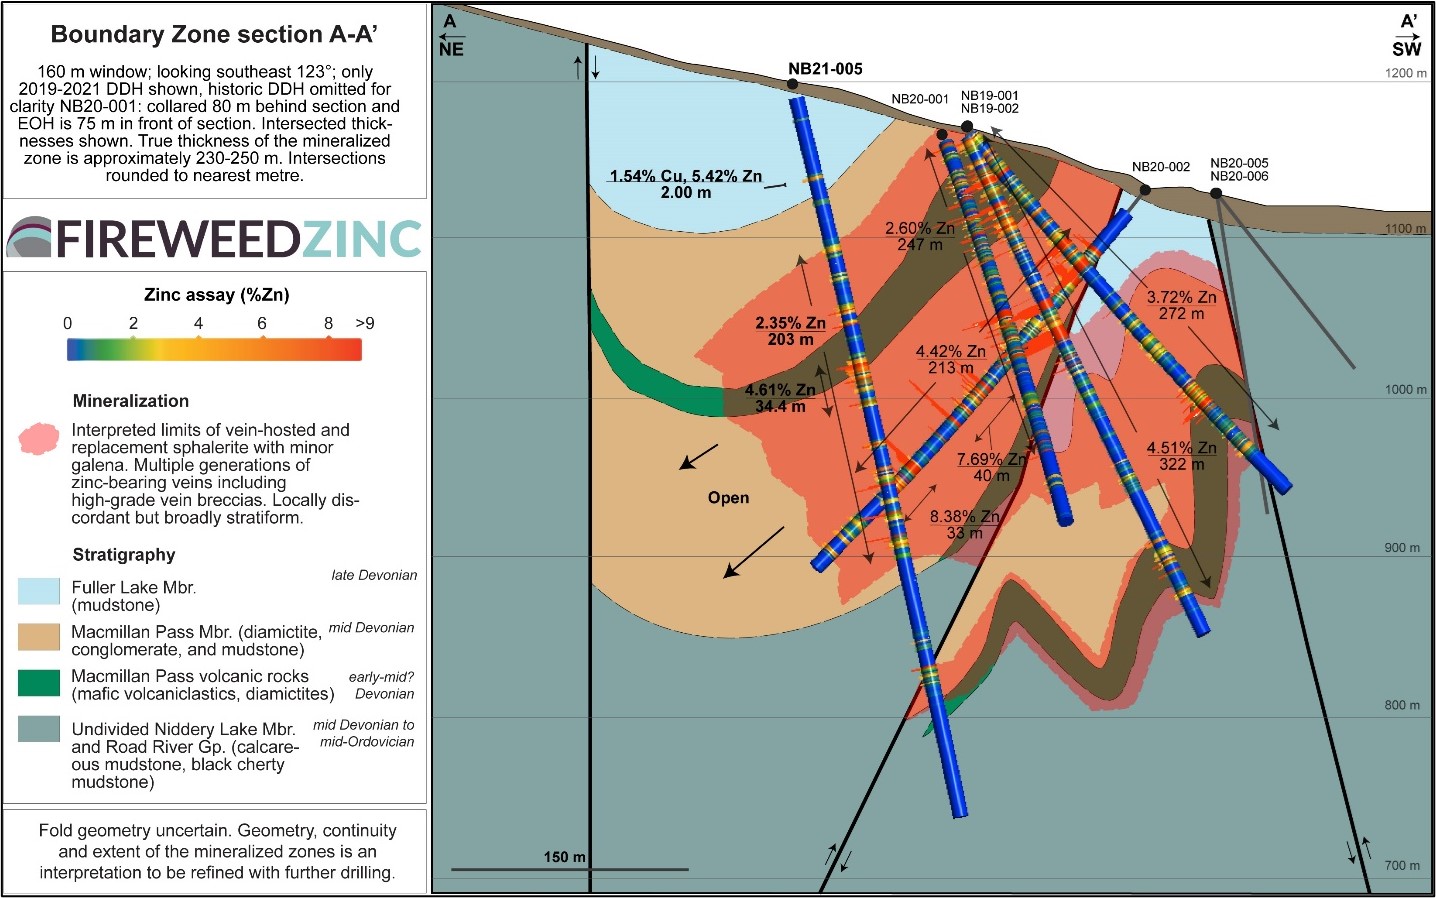 Cross Section A-A’: Boundary Zone geology and drill assay results